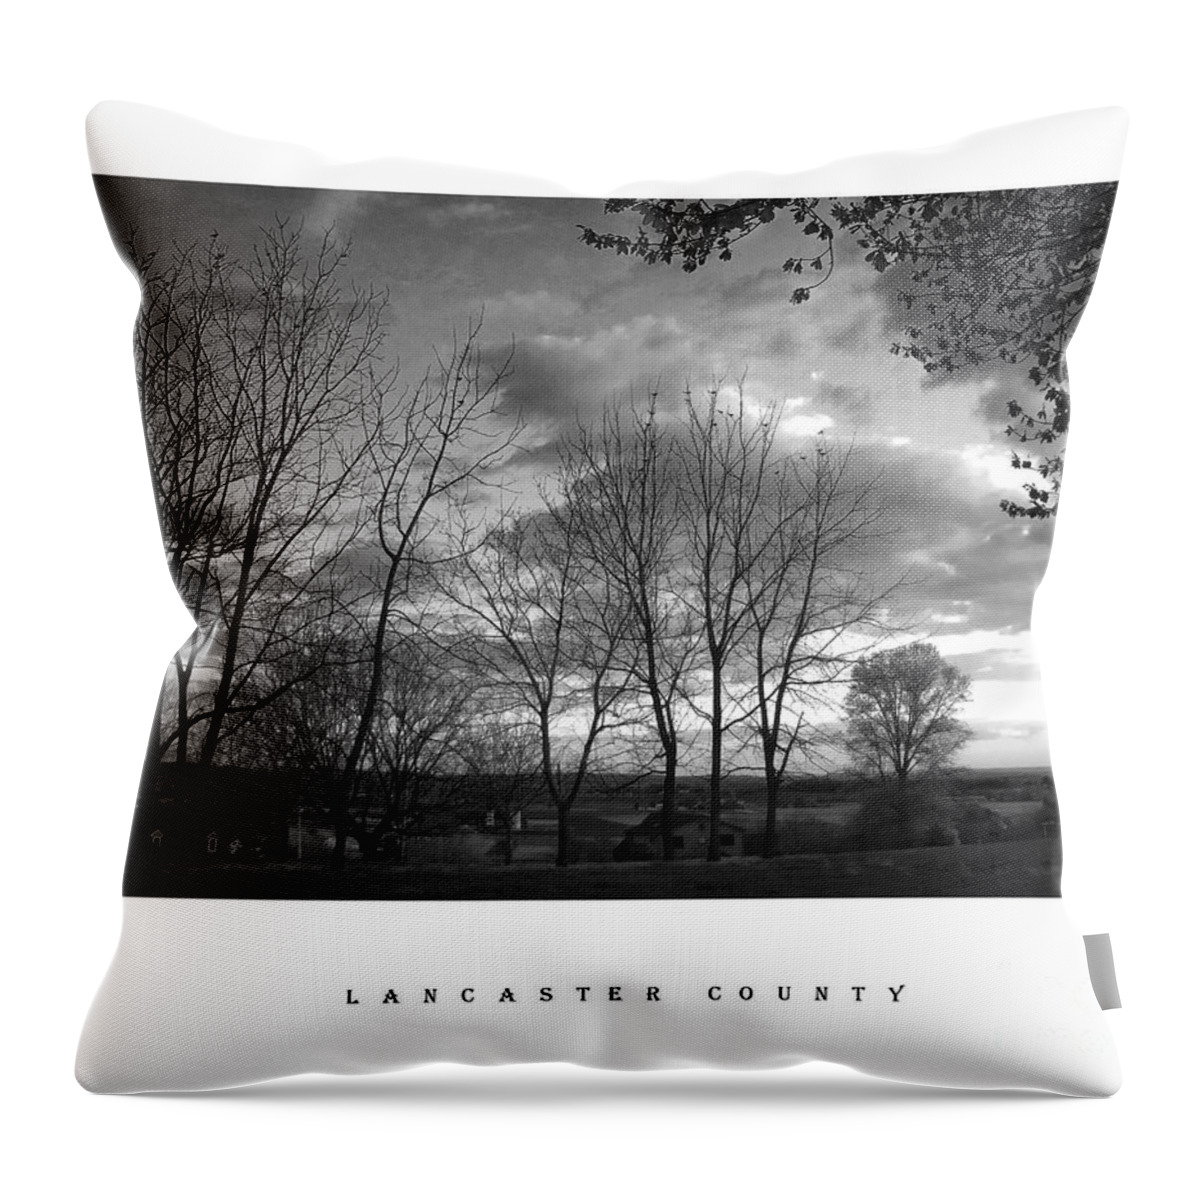 Evening Throw Pillow featuring the photograph Scenic Lancaster County by Vilas Malankar